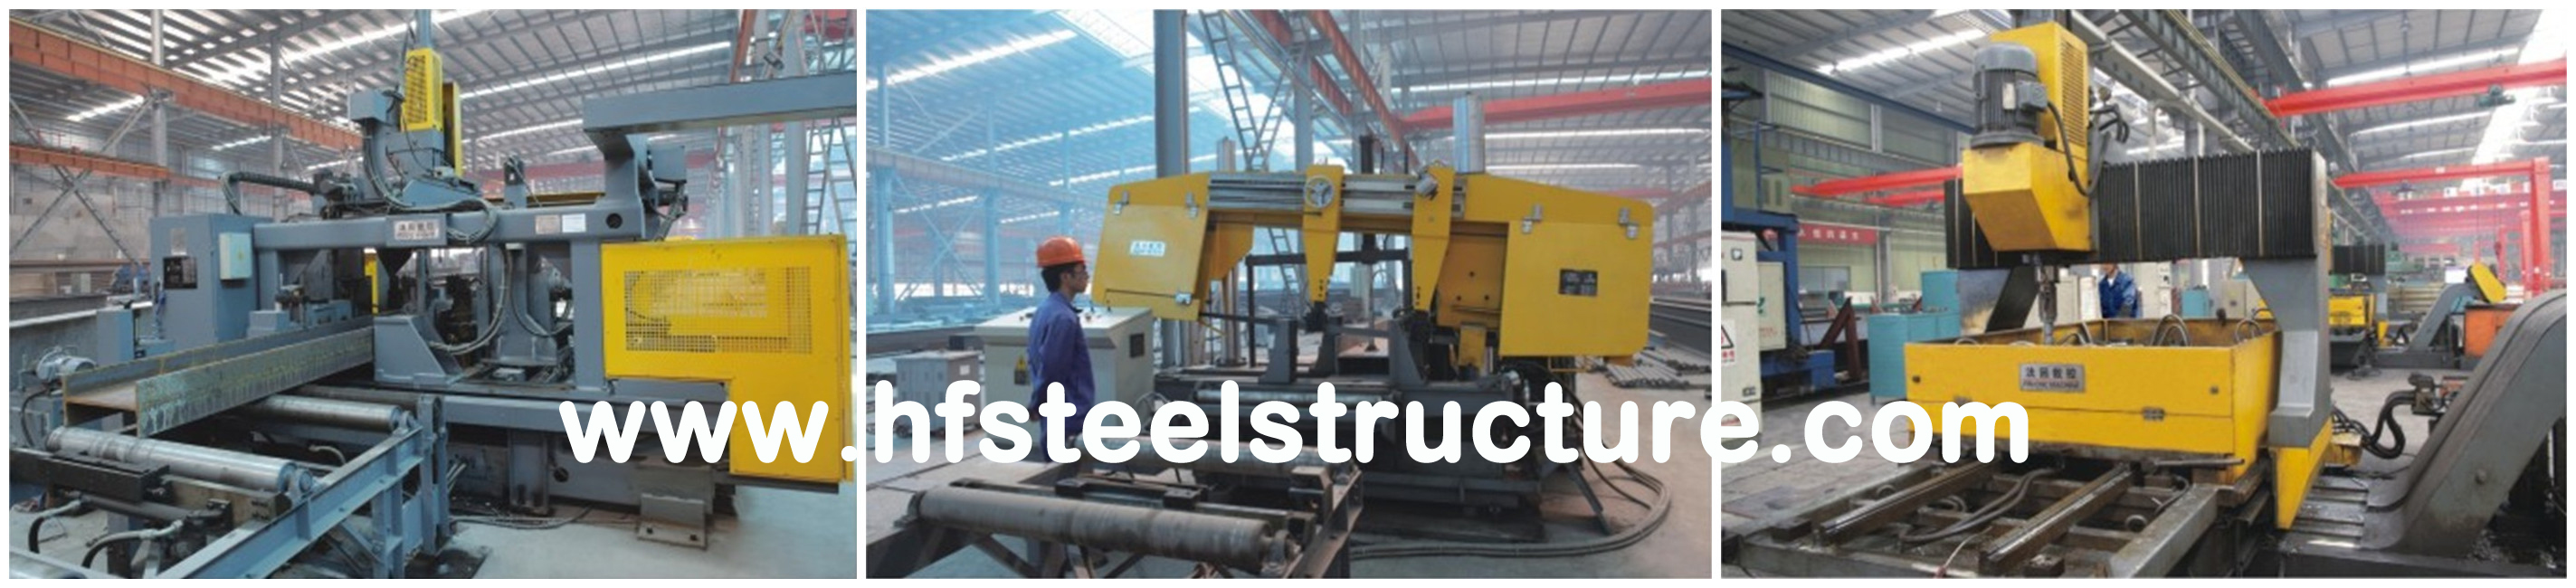 Modular Prefabricated Steel Structure Buildings With Long Life And Short Process Time